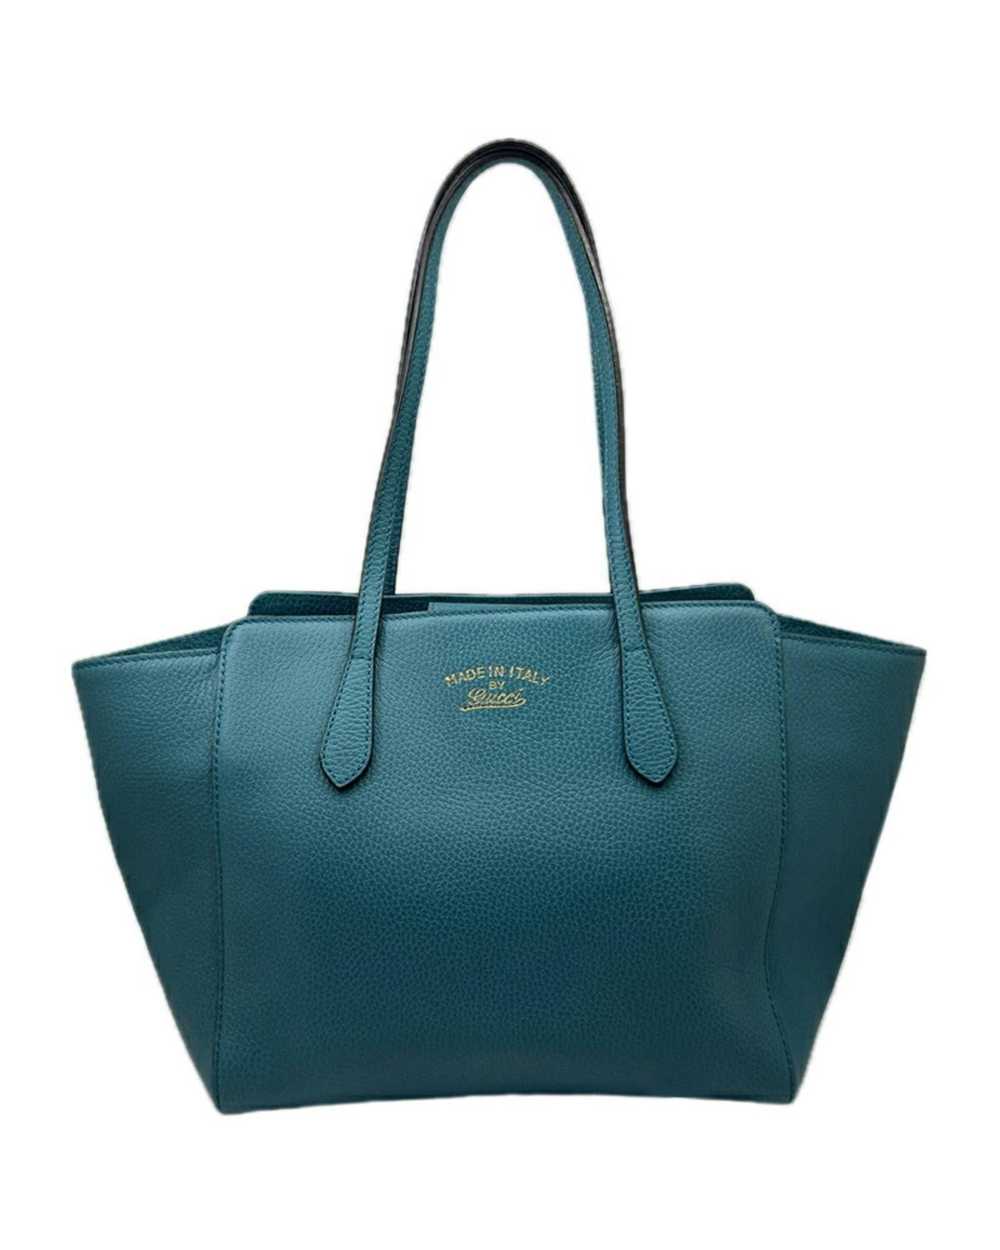 Gucci Blue Leather Swing Bag - image 1